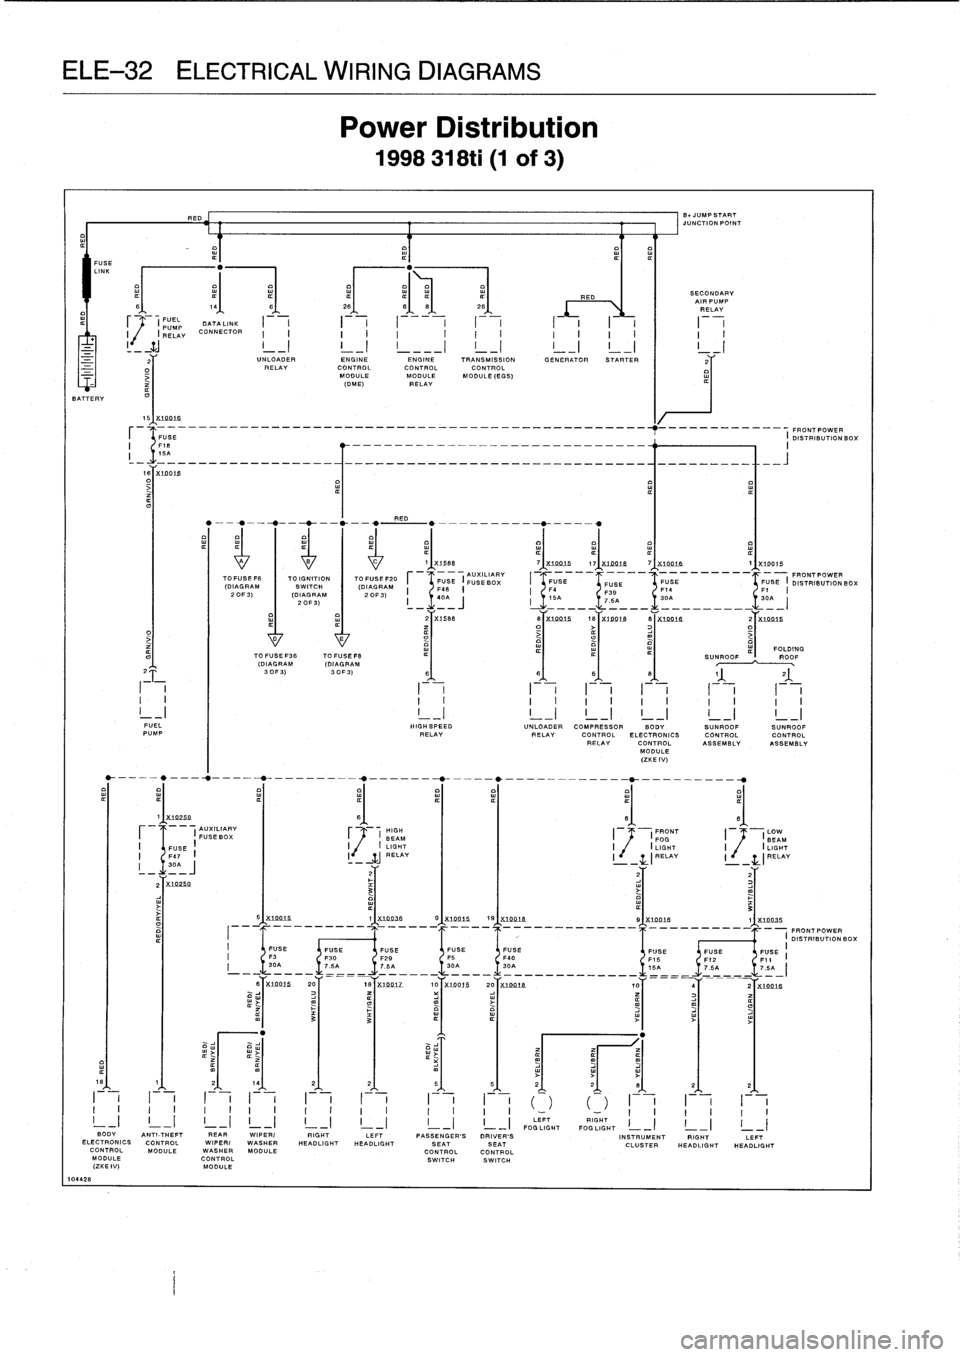 BMW 328i 1995 E36 Service Manual 
ELE-32
ELECTRICAL
WIRING
DIAGRAMS

7

FUSE
LINK

BATTERY

10442
8
2
O
0

15IX74419
-------------
FRONTPOWER
FUBE

	

I
DISTRIBUTIONBOX
I
15A

1~sTxLn91B

	

^
------------------

4
2x0
AUXILIARY
FUSE